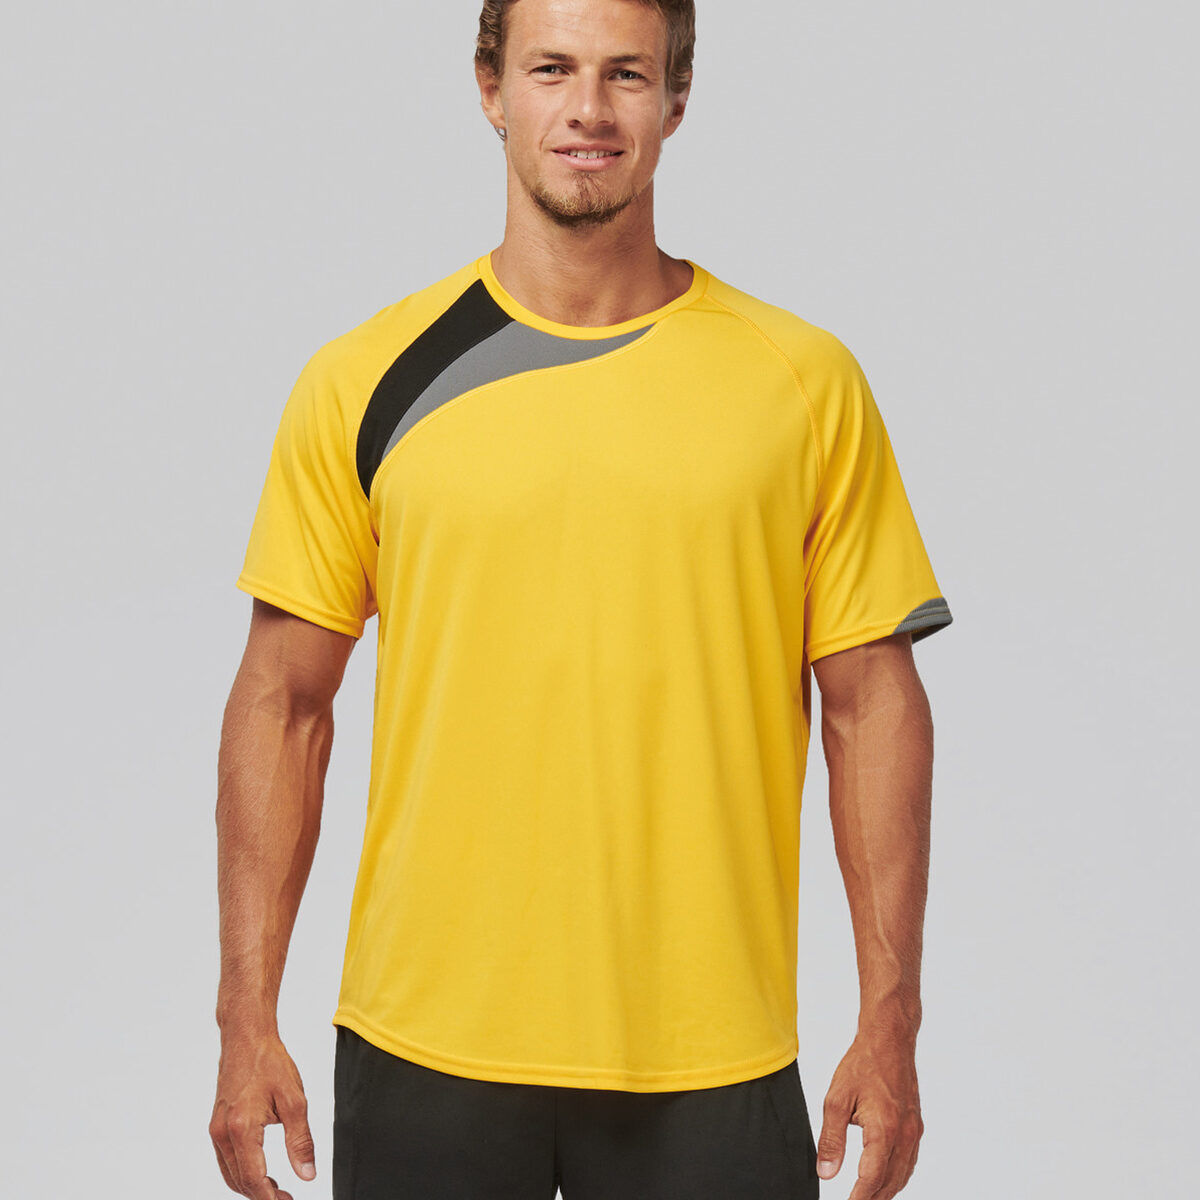 Adults short-sleeved jersey